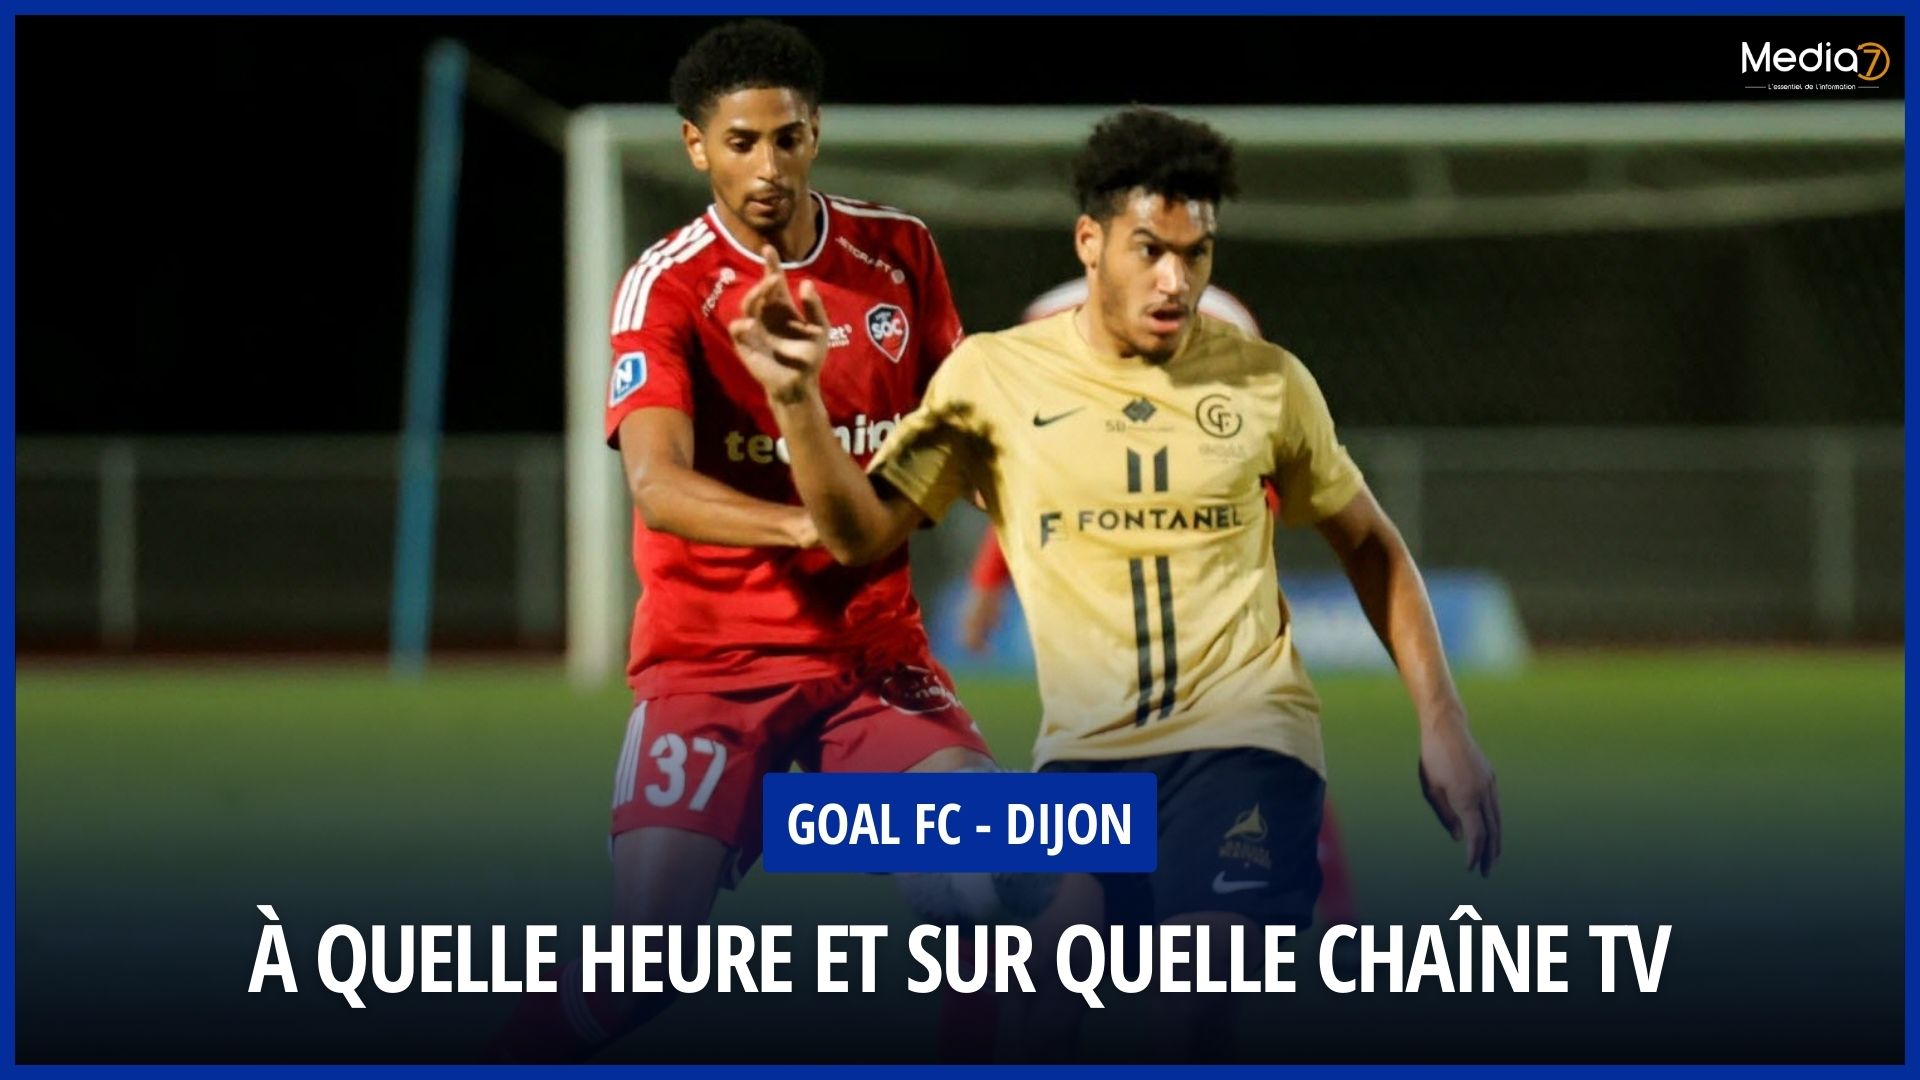 Live broadcast of the GOAL FC - Dijon match: TV channel and schedule - Media7